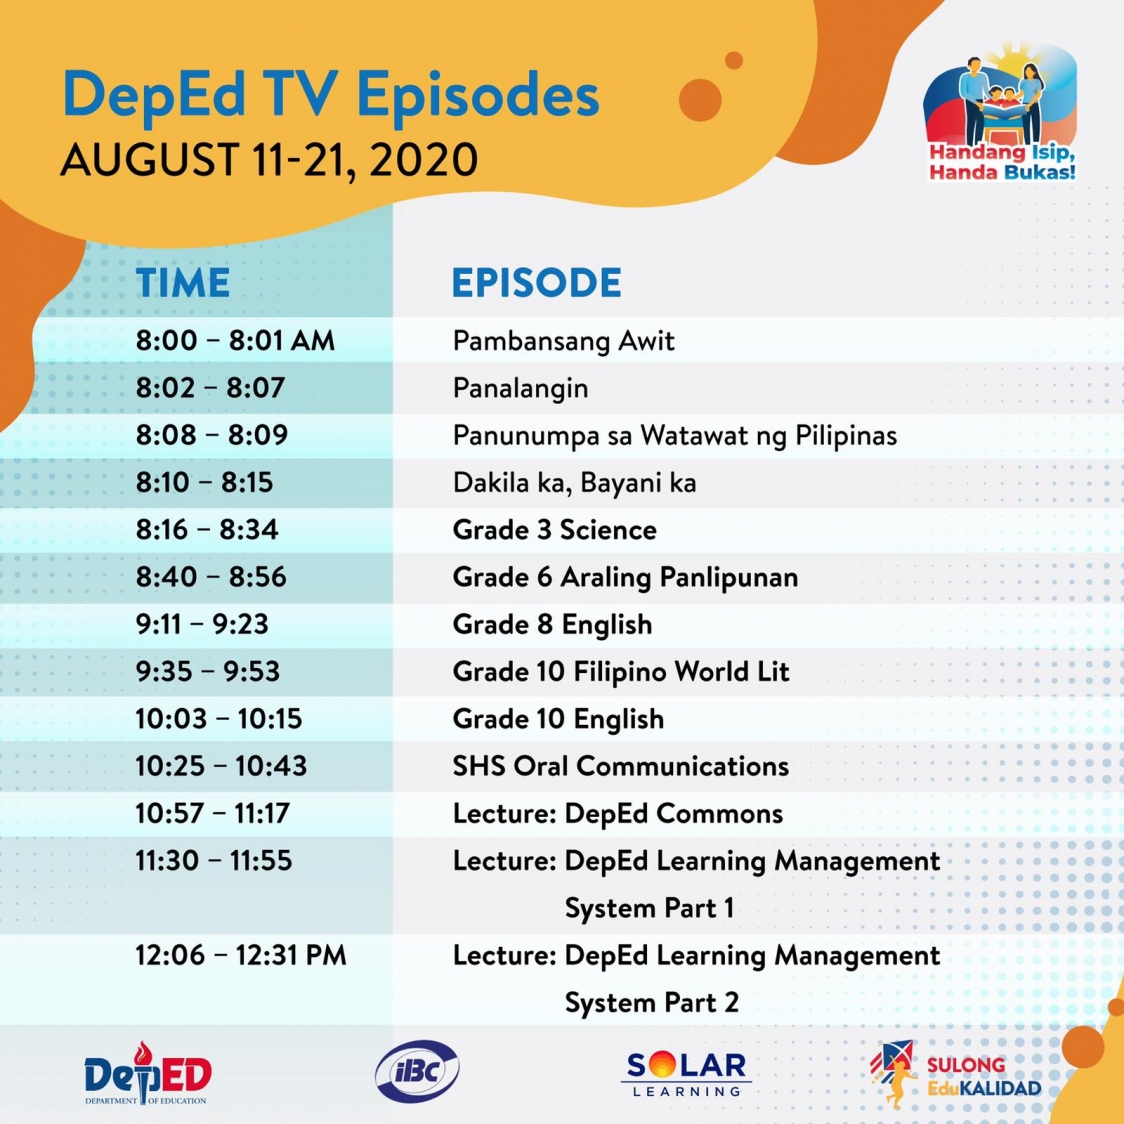 educational television programs in the philippines